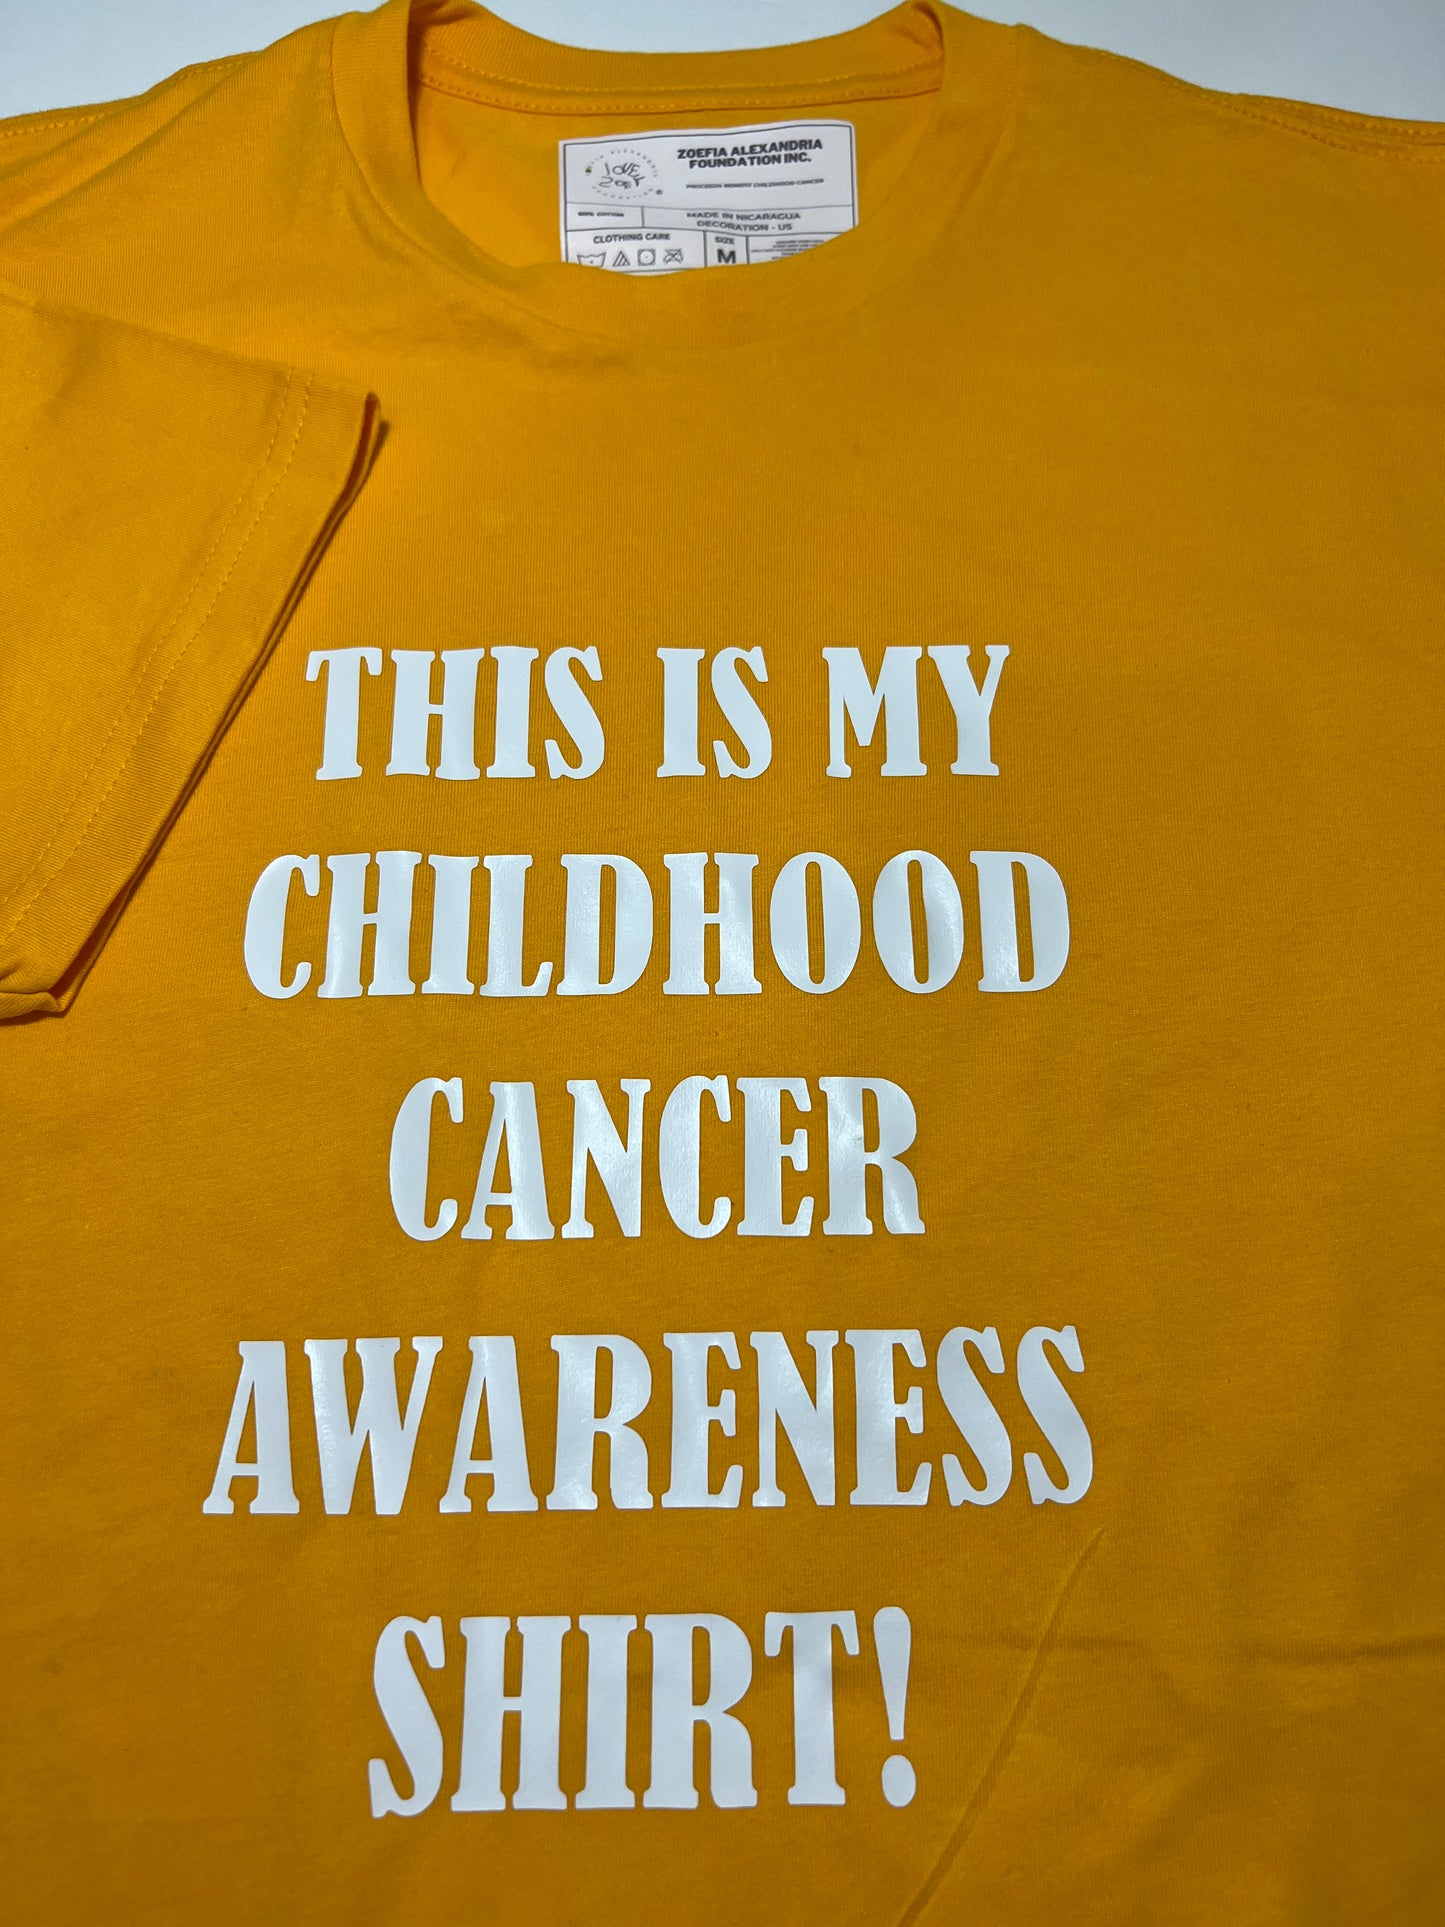 This is my Childhood Cancer Awareness Shirt - T-Shirt